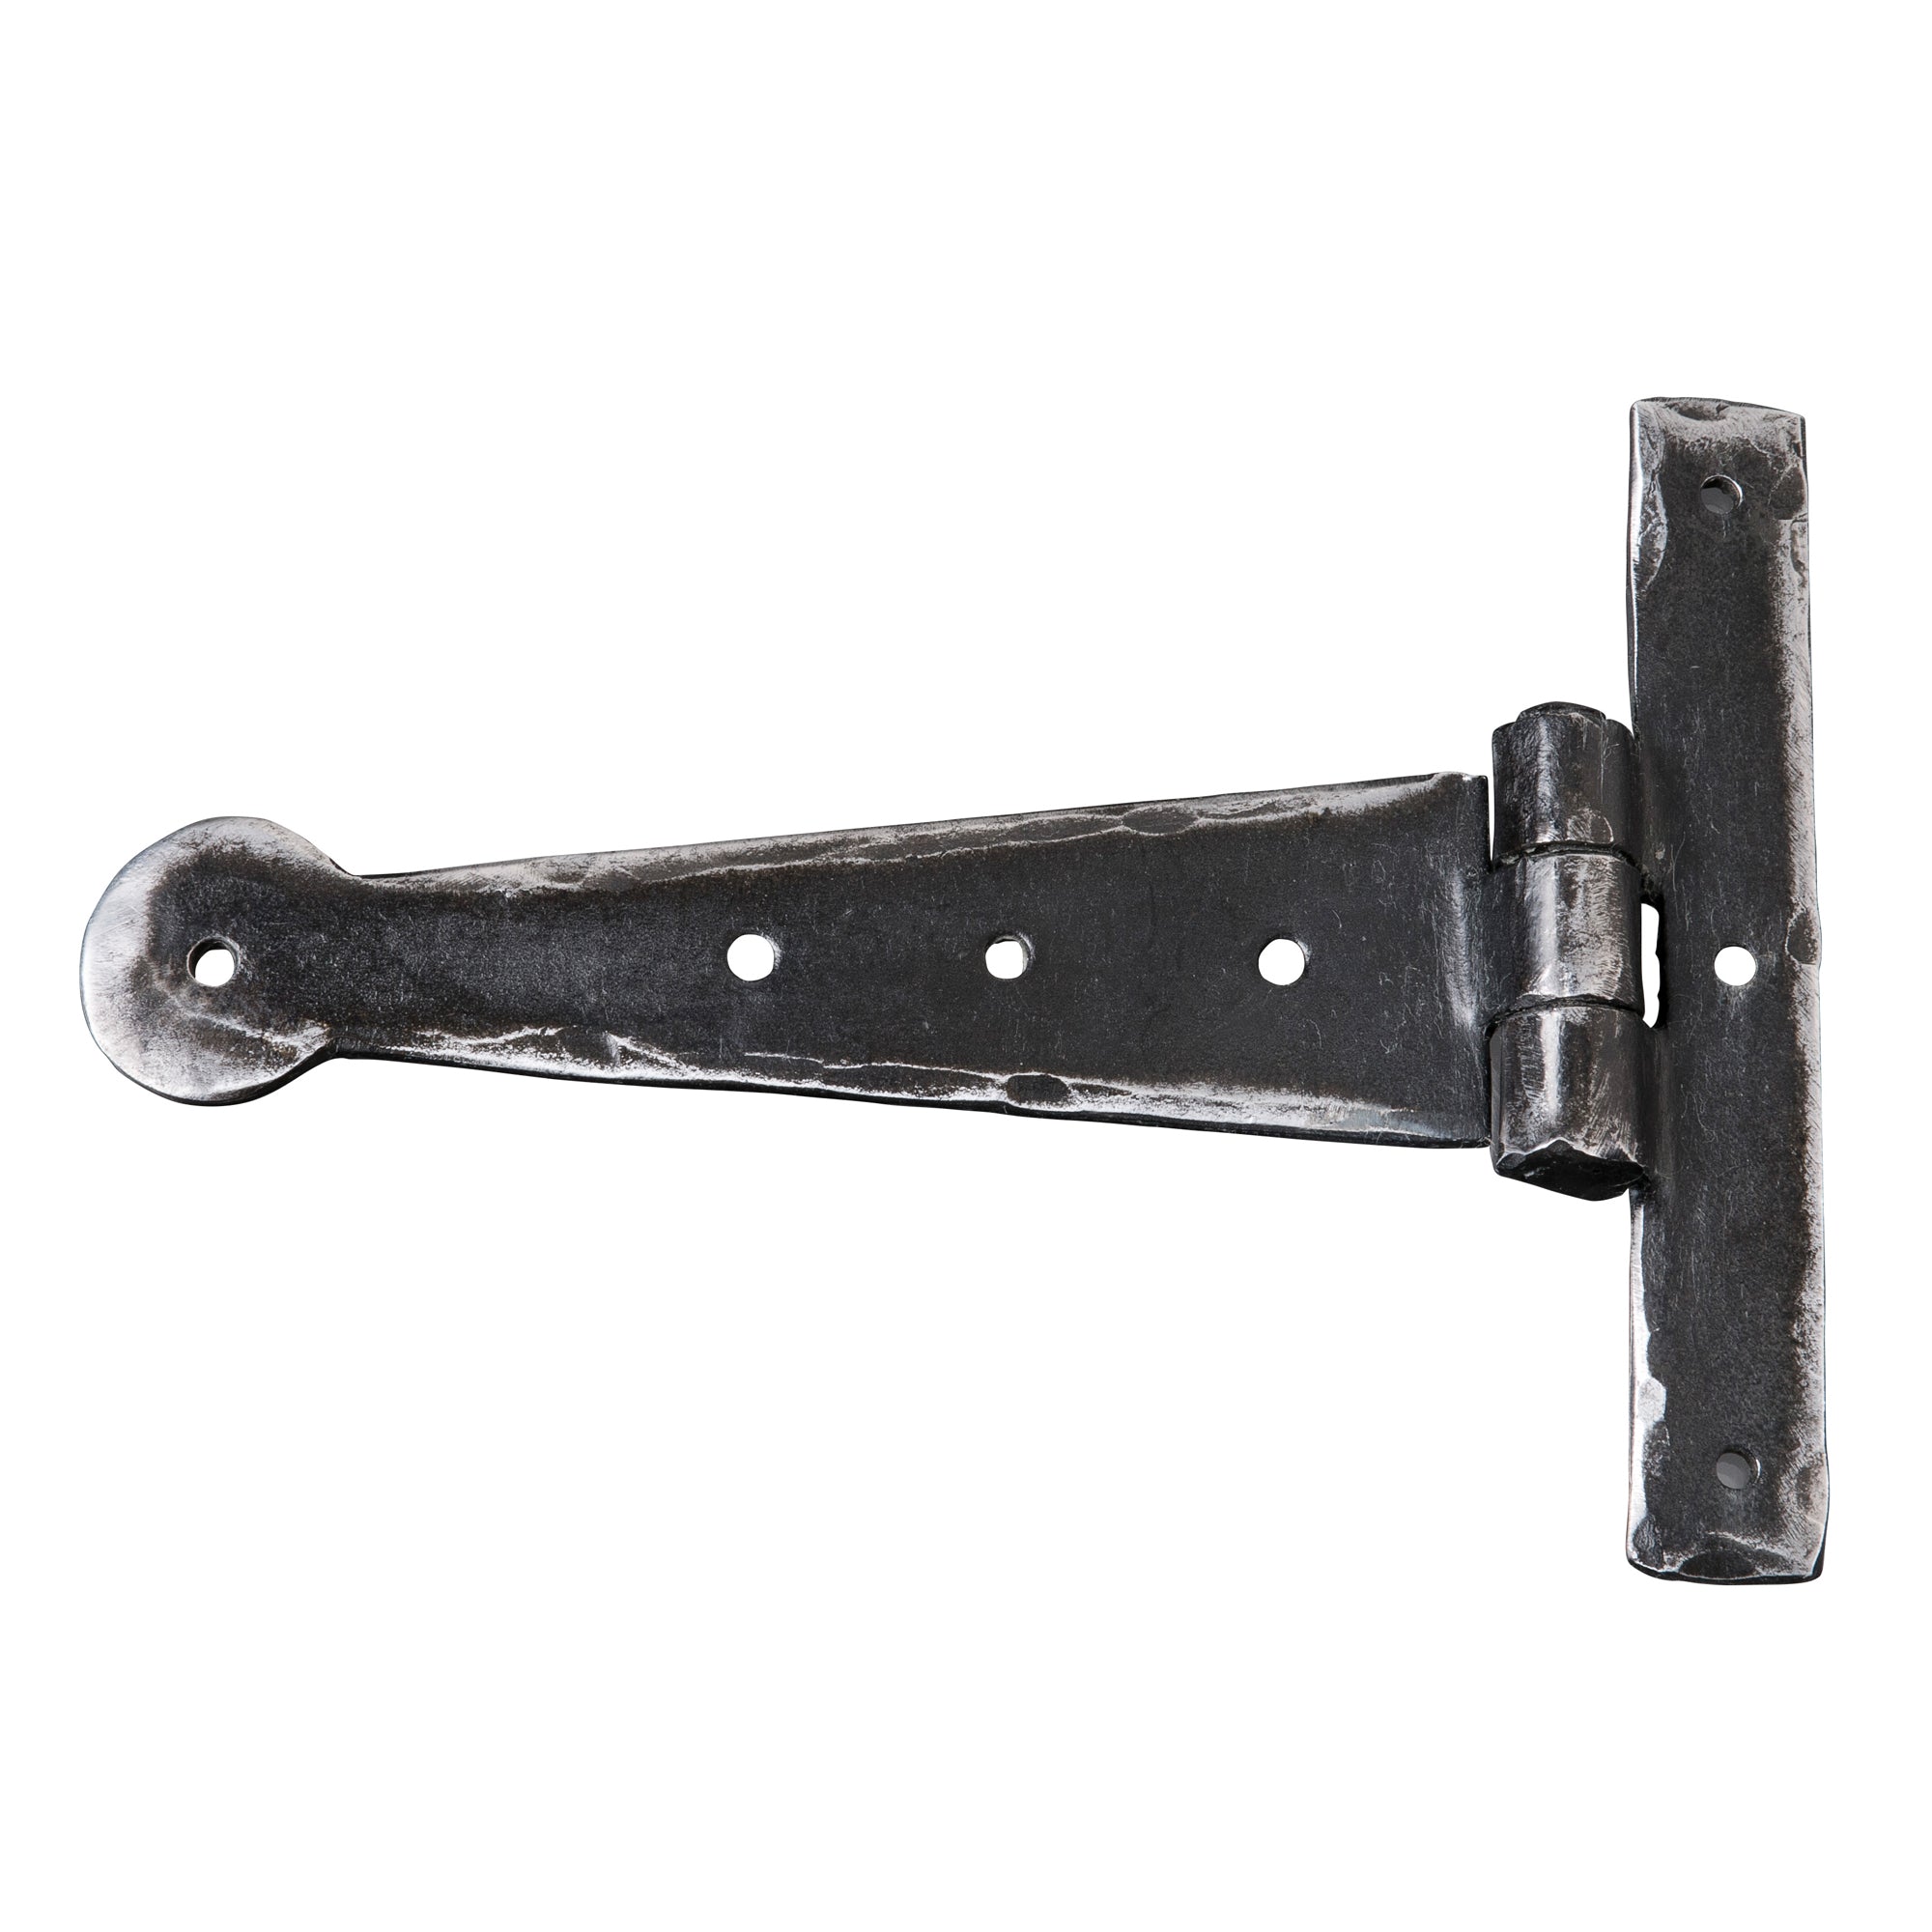 Penny End T-Hinge 4" (100mm) Door Hinge.  Hand forged. Traditional Authentique